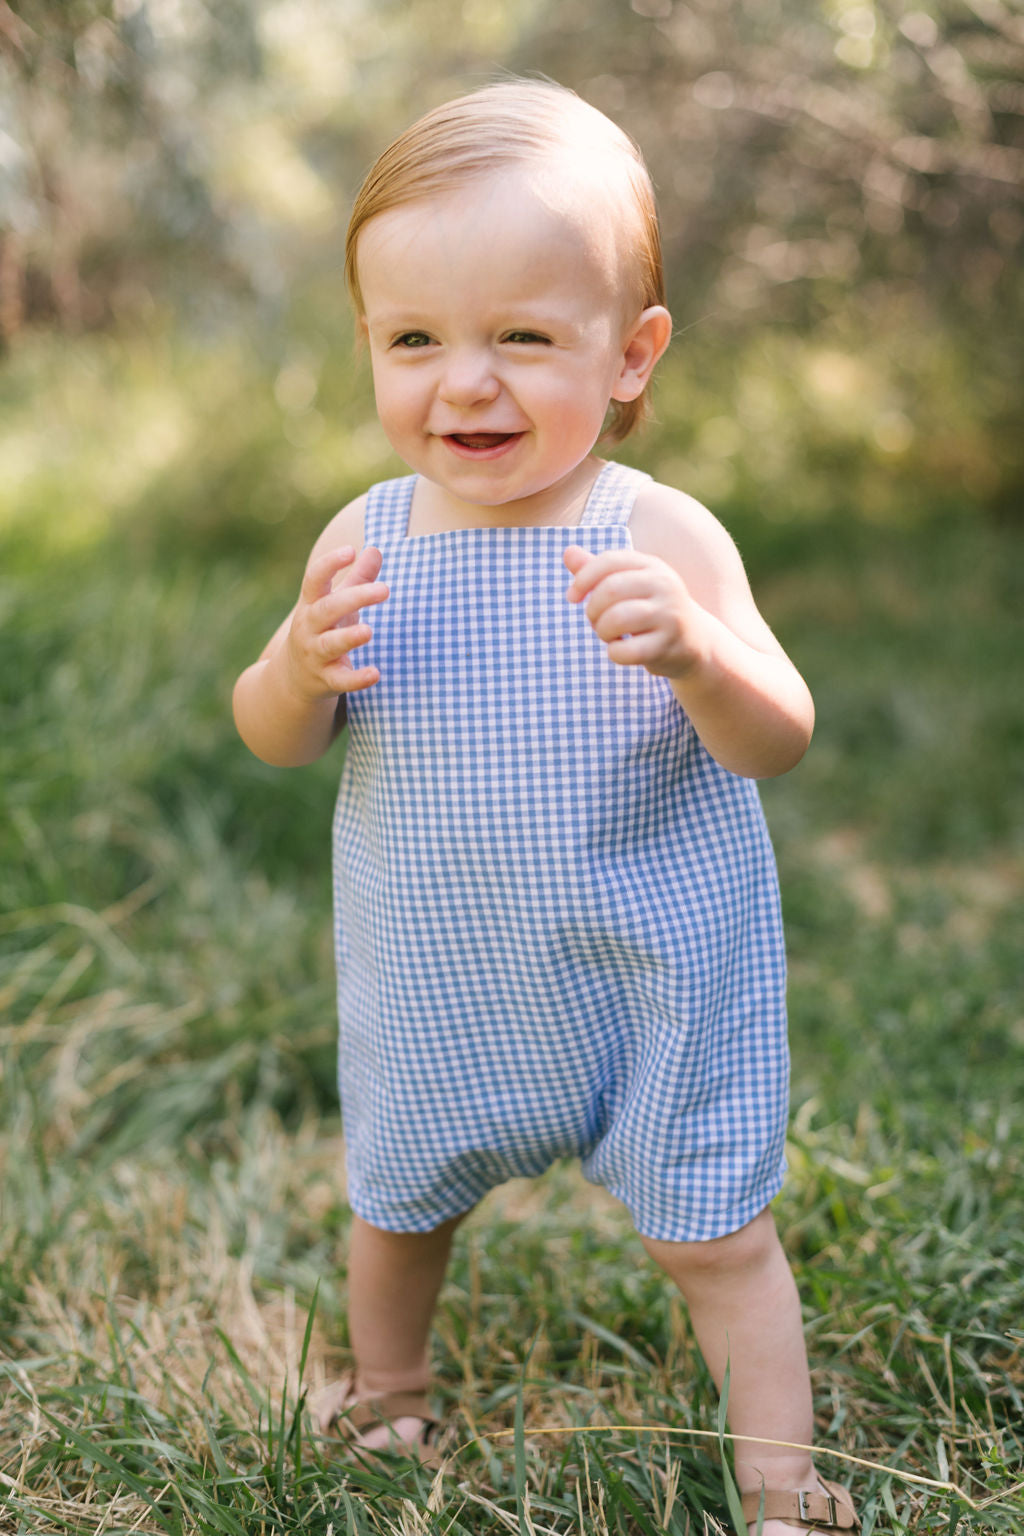 Knotted Shortall in Cornflower Gingham